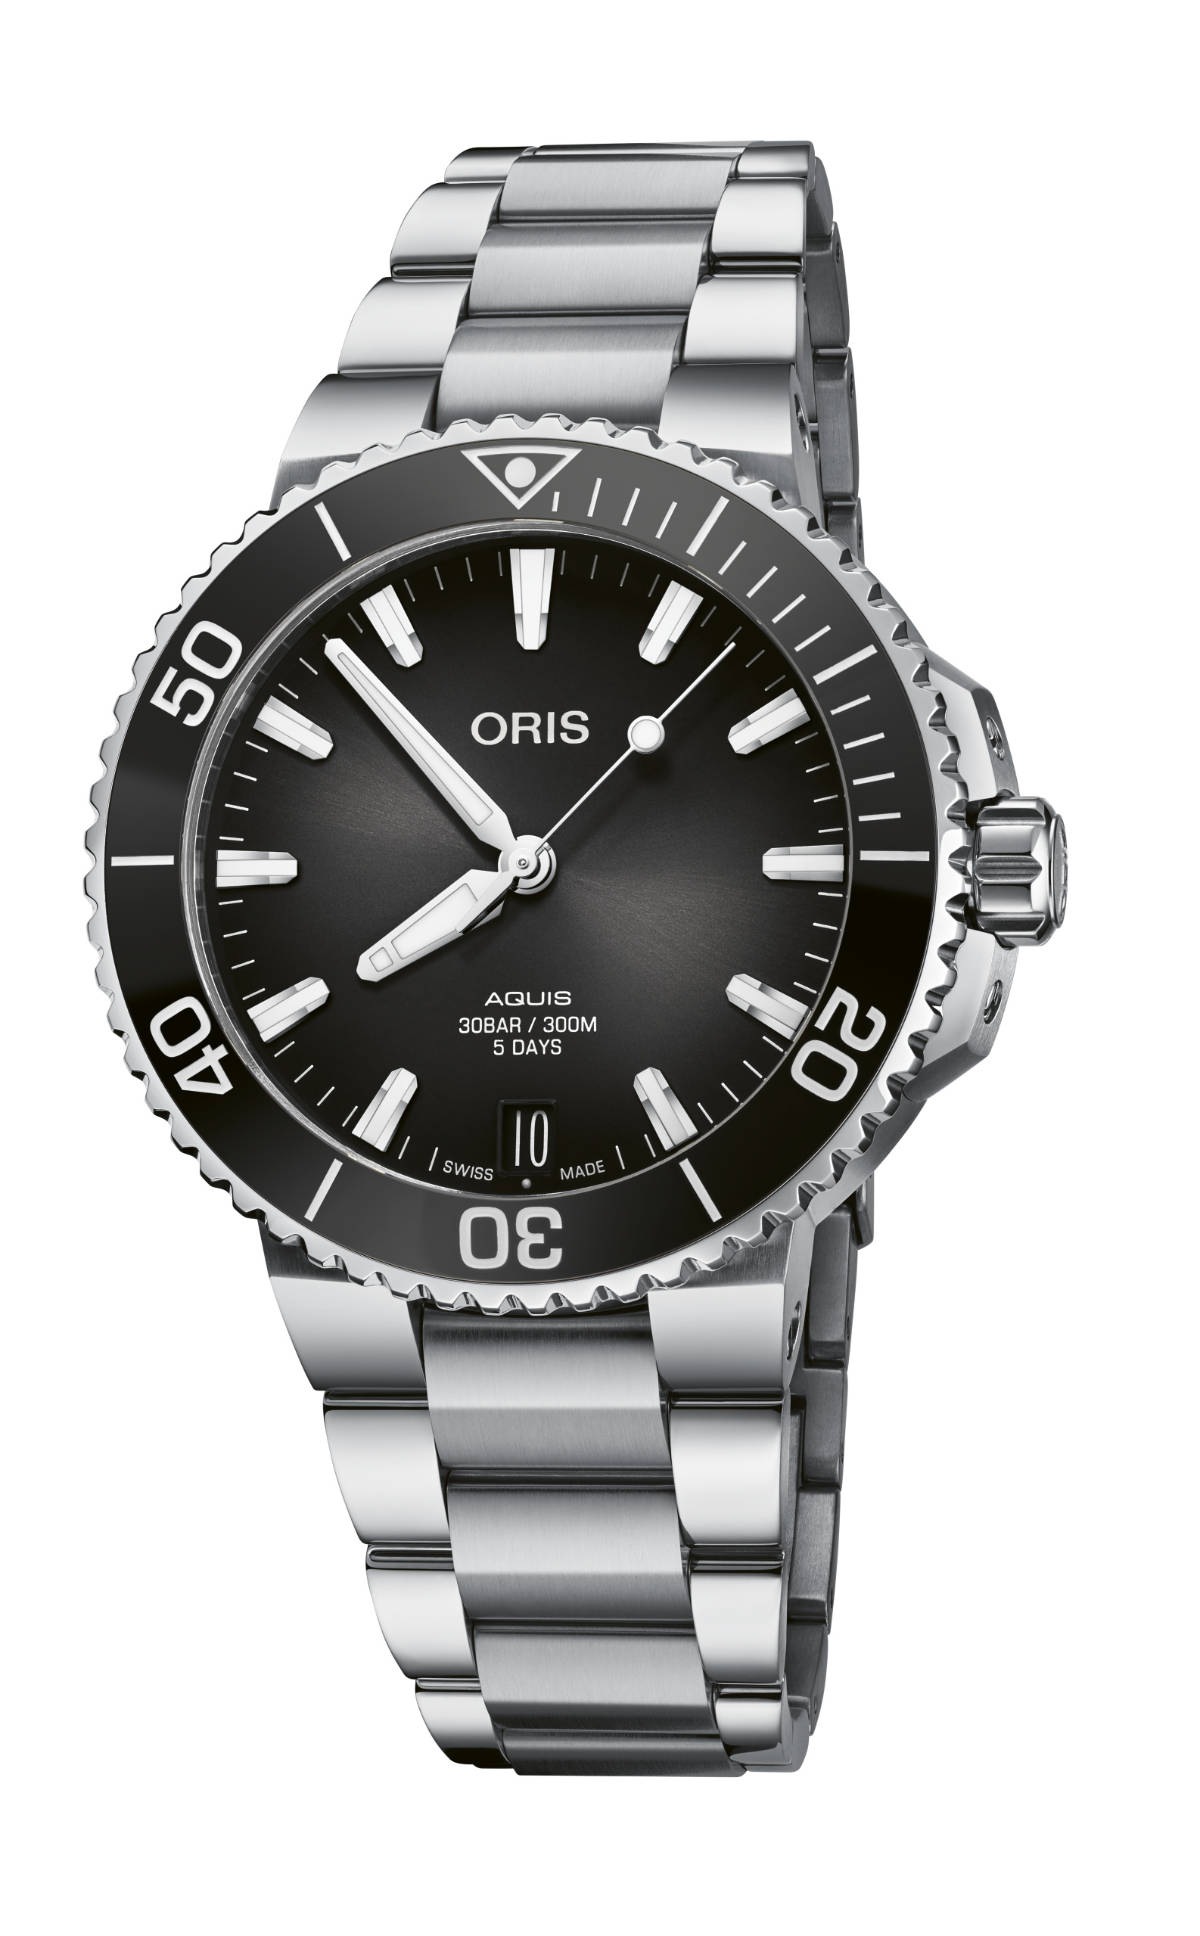 New Watch From The House Of Oris: Aquis Date Calibre 400 41.5 Mm